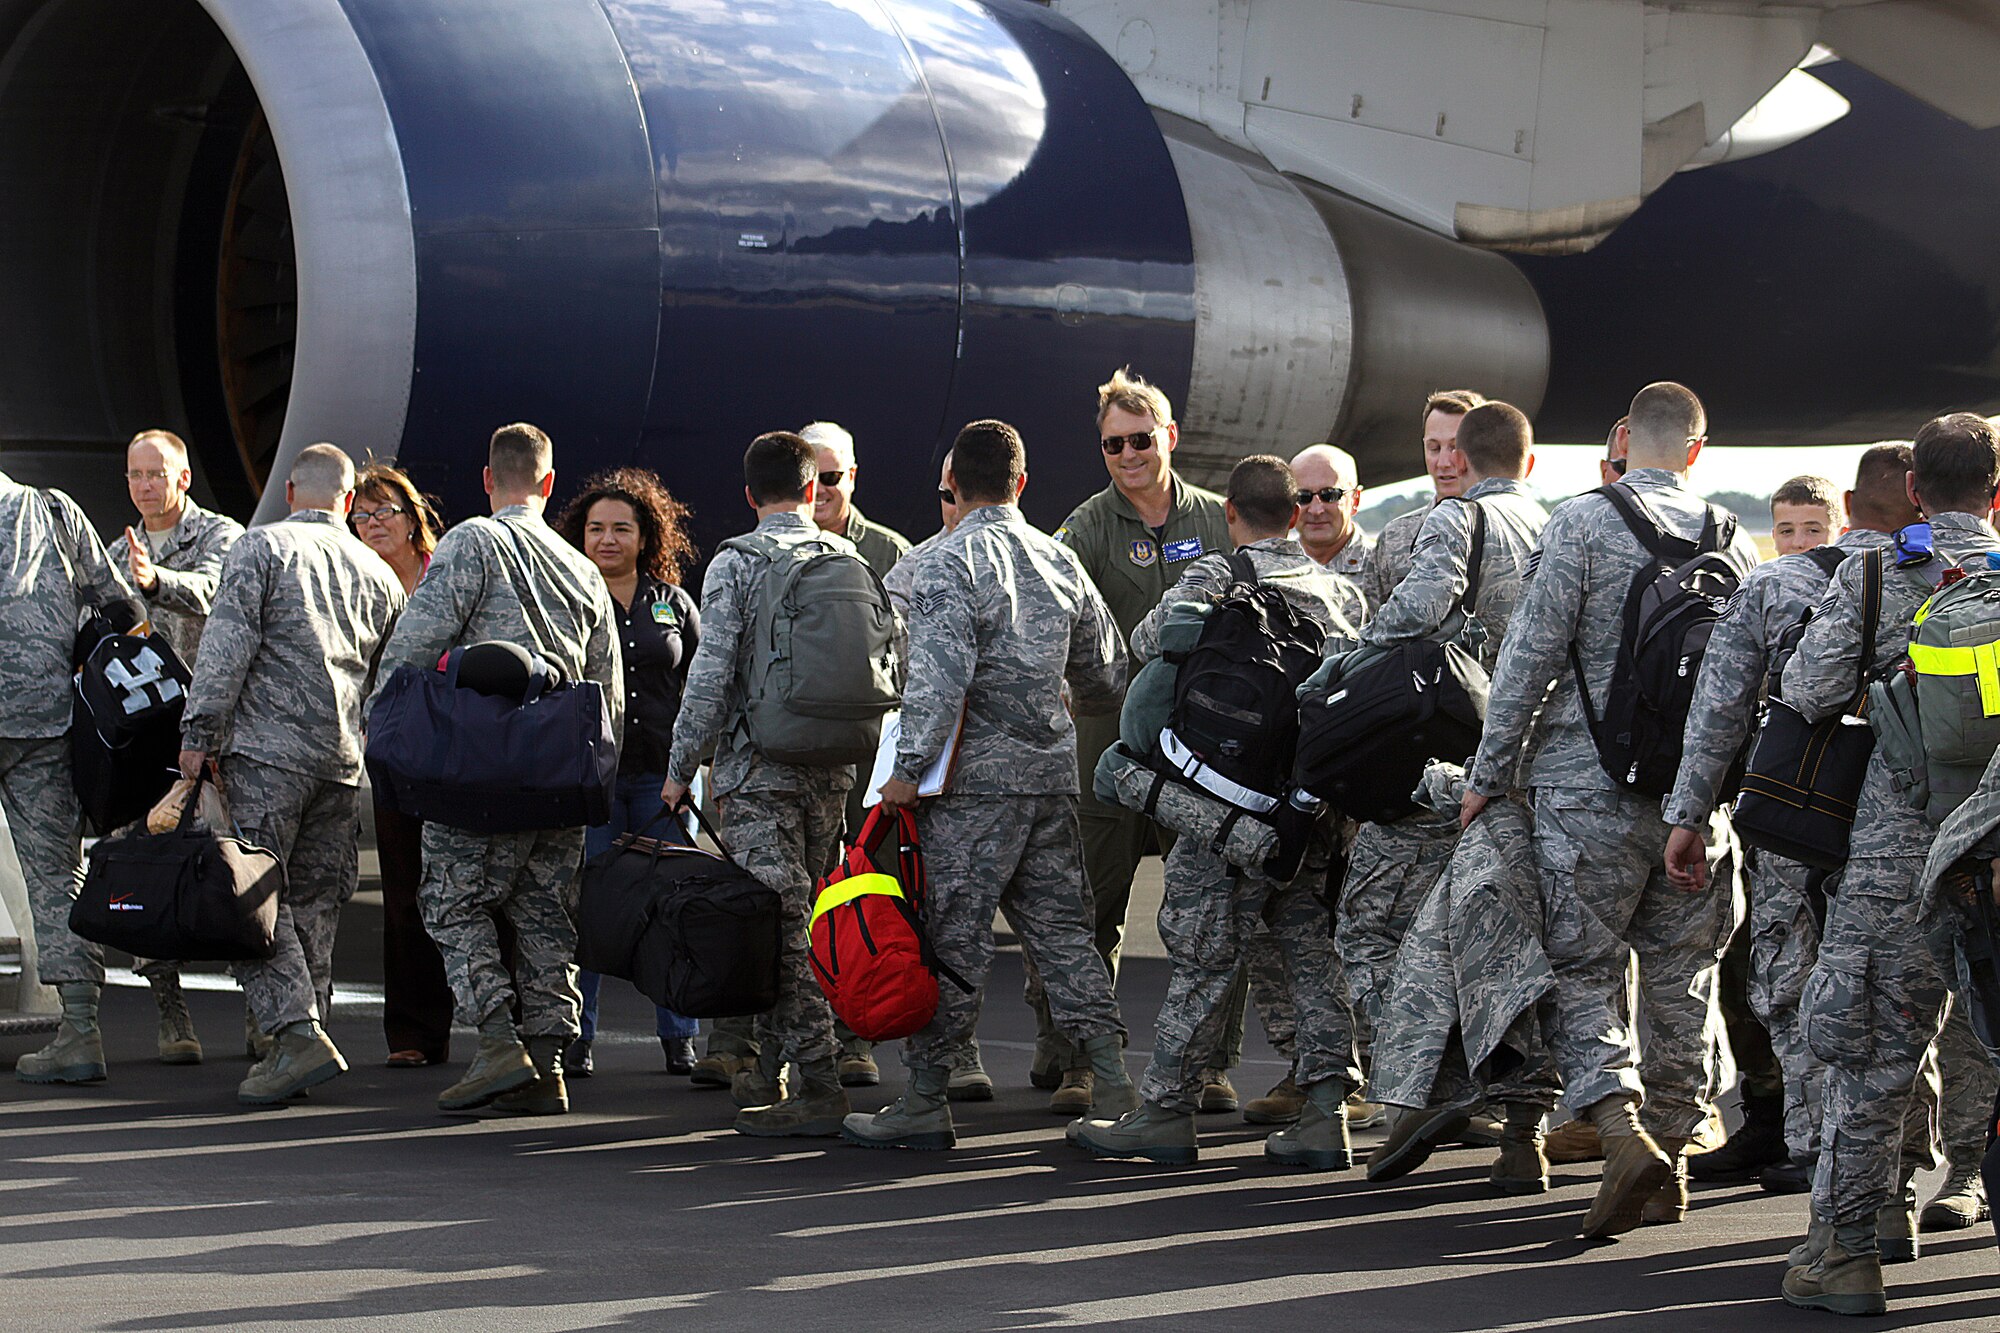 Senior military leaders from the 482nd Fighter Wing and local government officials say goodbye to Air Force Reservists as they board a charter aircraft destined for South Korea at Homestead Air Reserve Base on Nov. 28.  The deployment of Airman to the Korean peninsula is part of a routine Theater Security Package training rotation to the Asia-Pacific region. (U.S. Air Force photo/Tim Norton) 